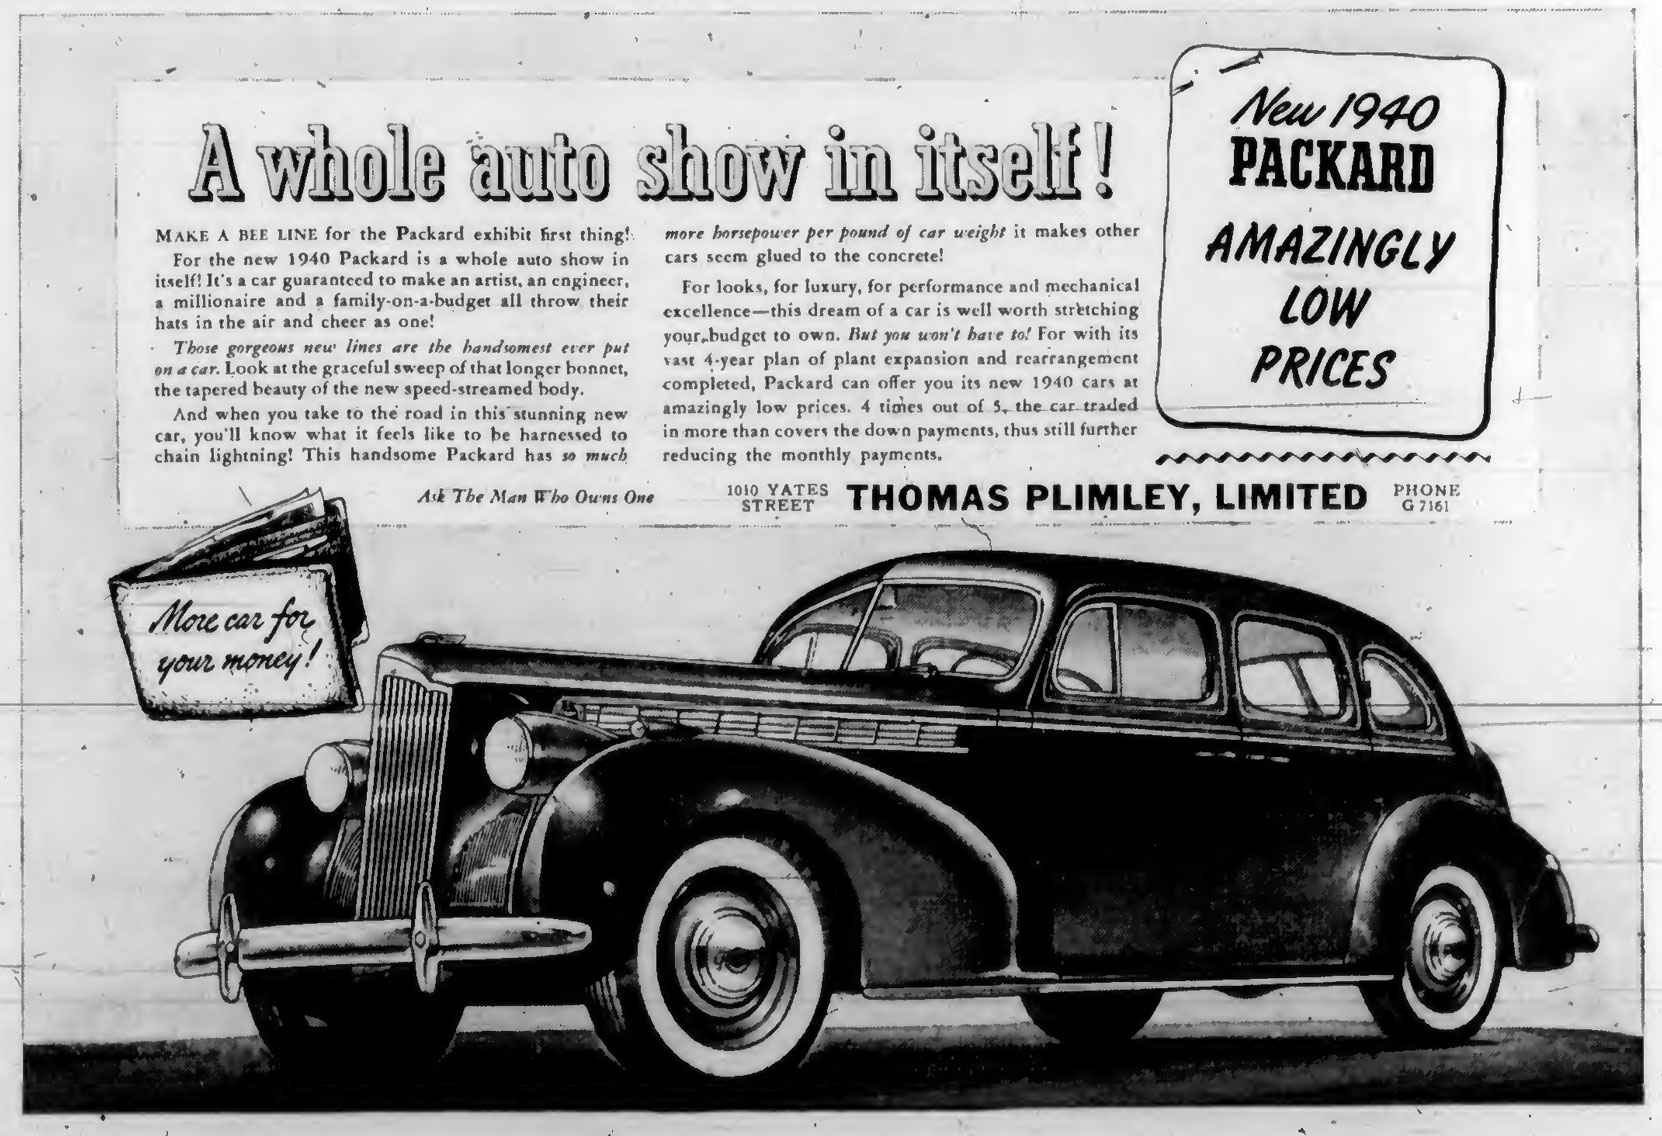 1940 advertisement for Packard, by Thomas Plimley Ltd., 1010 Yates Street (Victoria Online Sightseeing Tours collection)